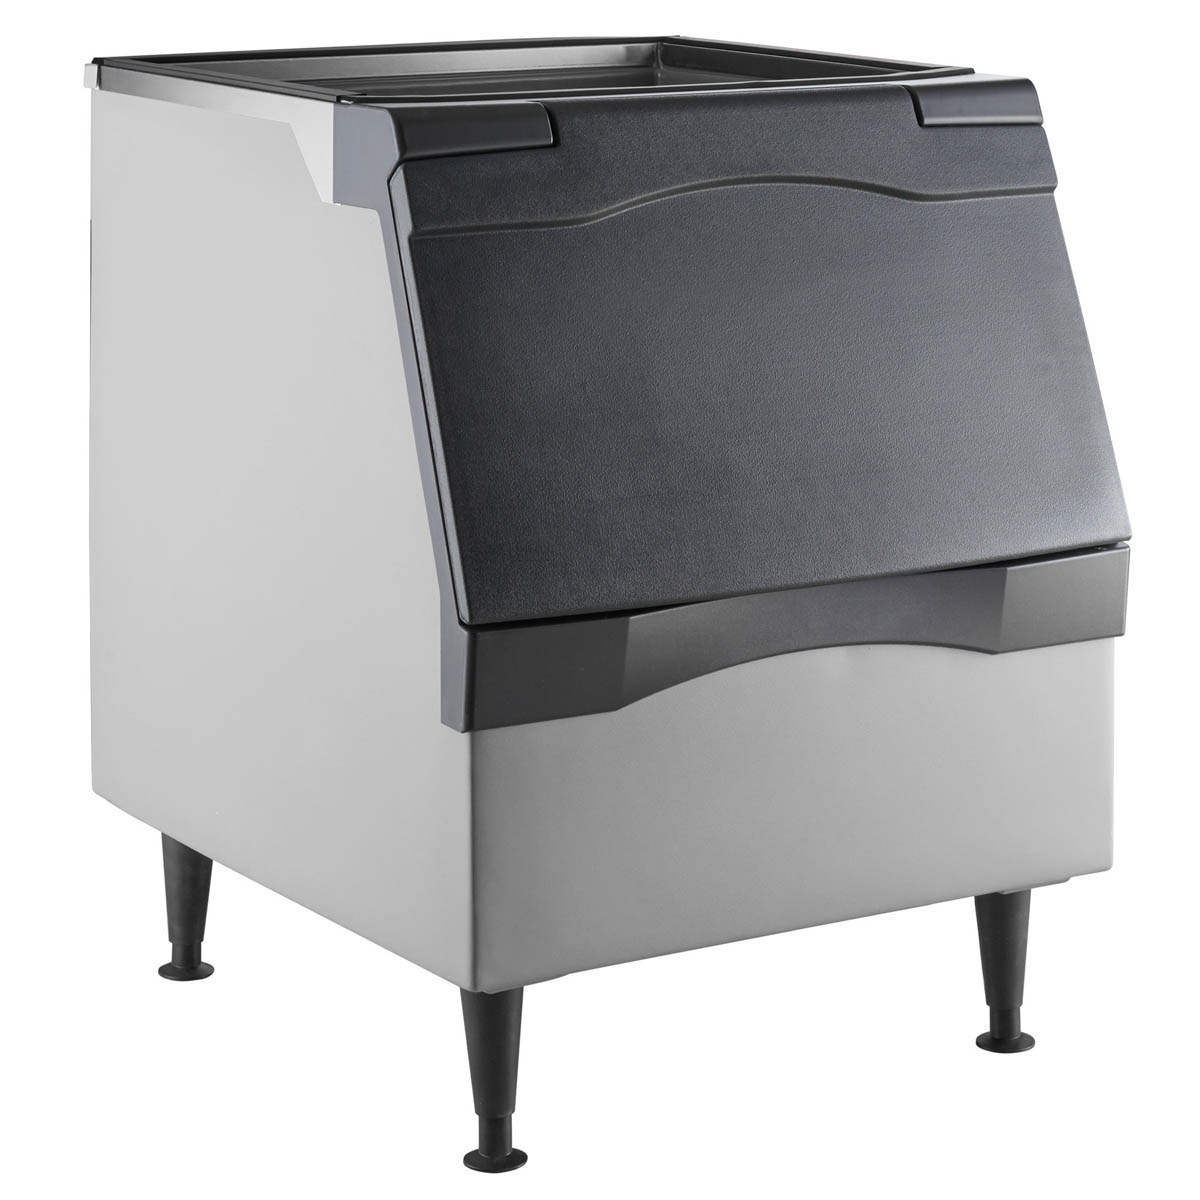 With Scotsman B330P Is An Effective Way To Keep Your Ice Supply Cool and Available, Chef's Deal